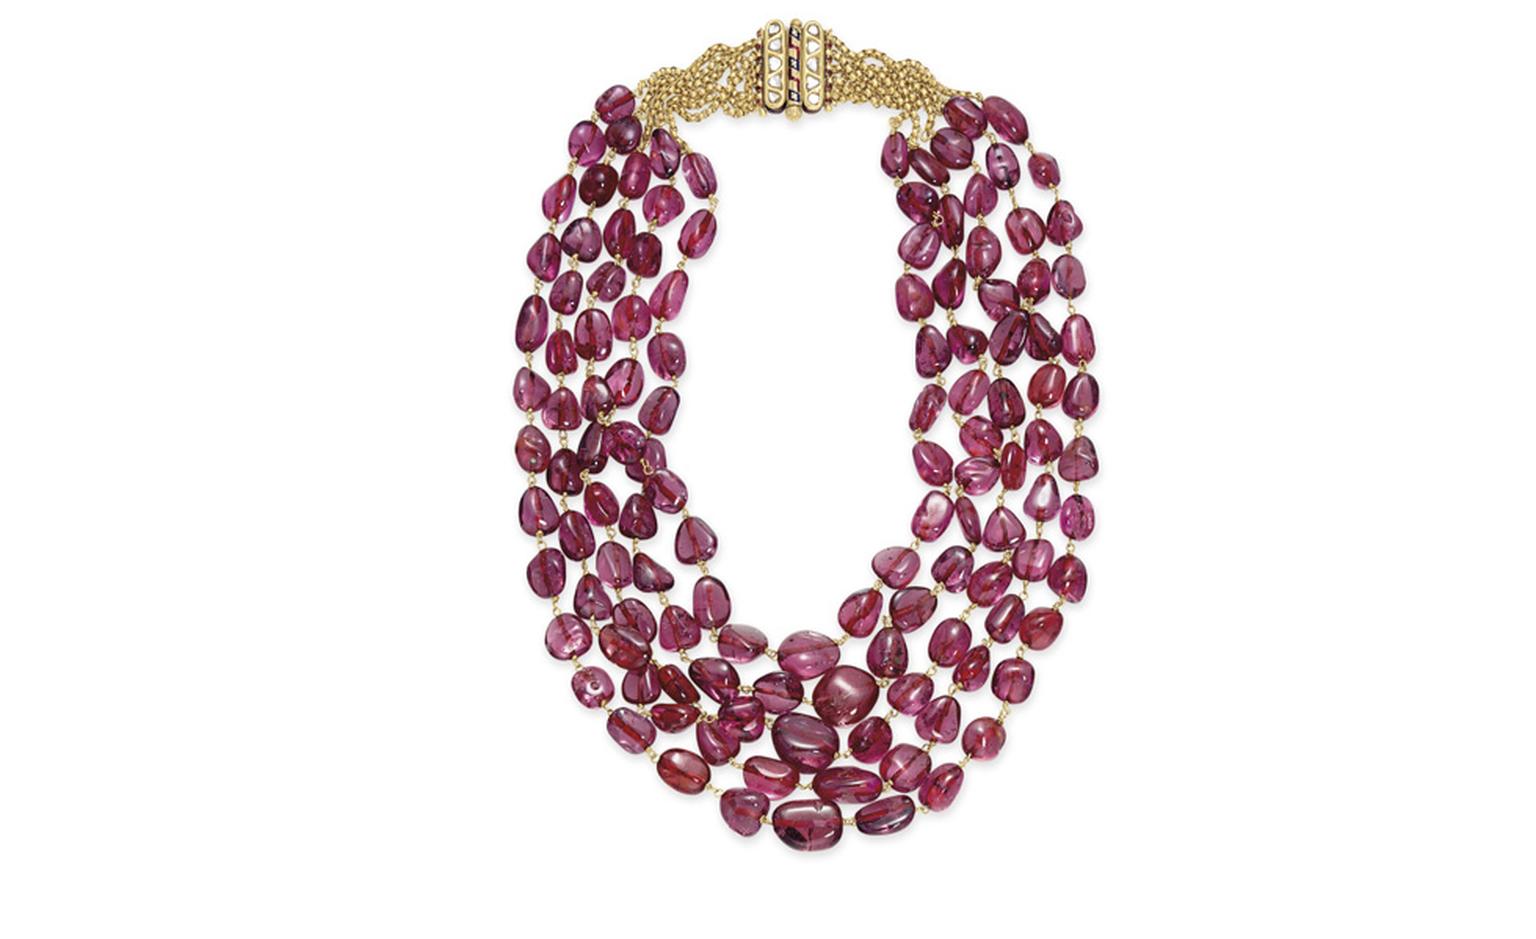 LOT 133 AN ANTIQUE SPINEL, DIAMOND AND ENAMEL NECKLACE   North Indian, circa 1900, 18 ins. Estimate $100,000-$150,000